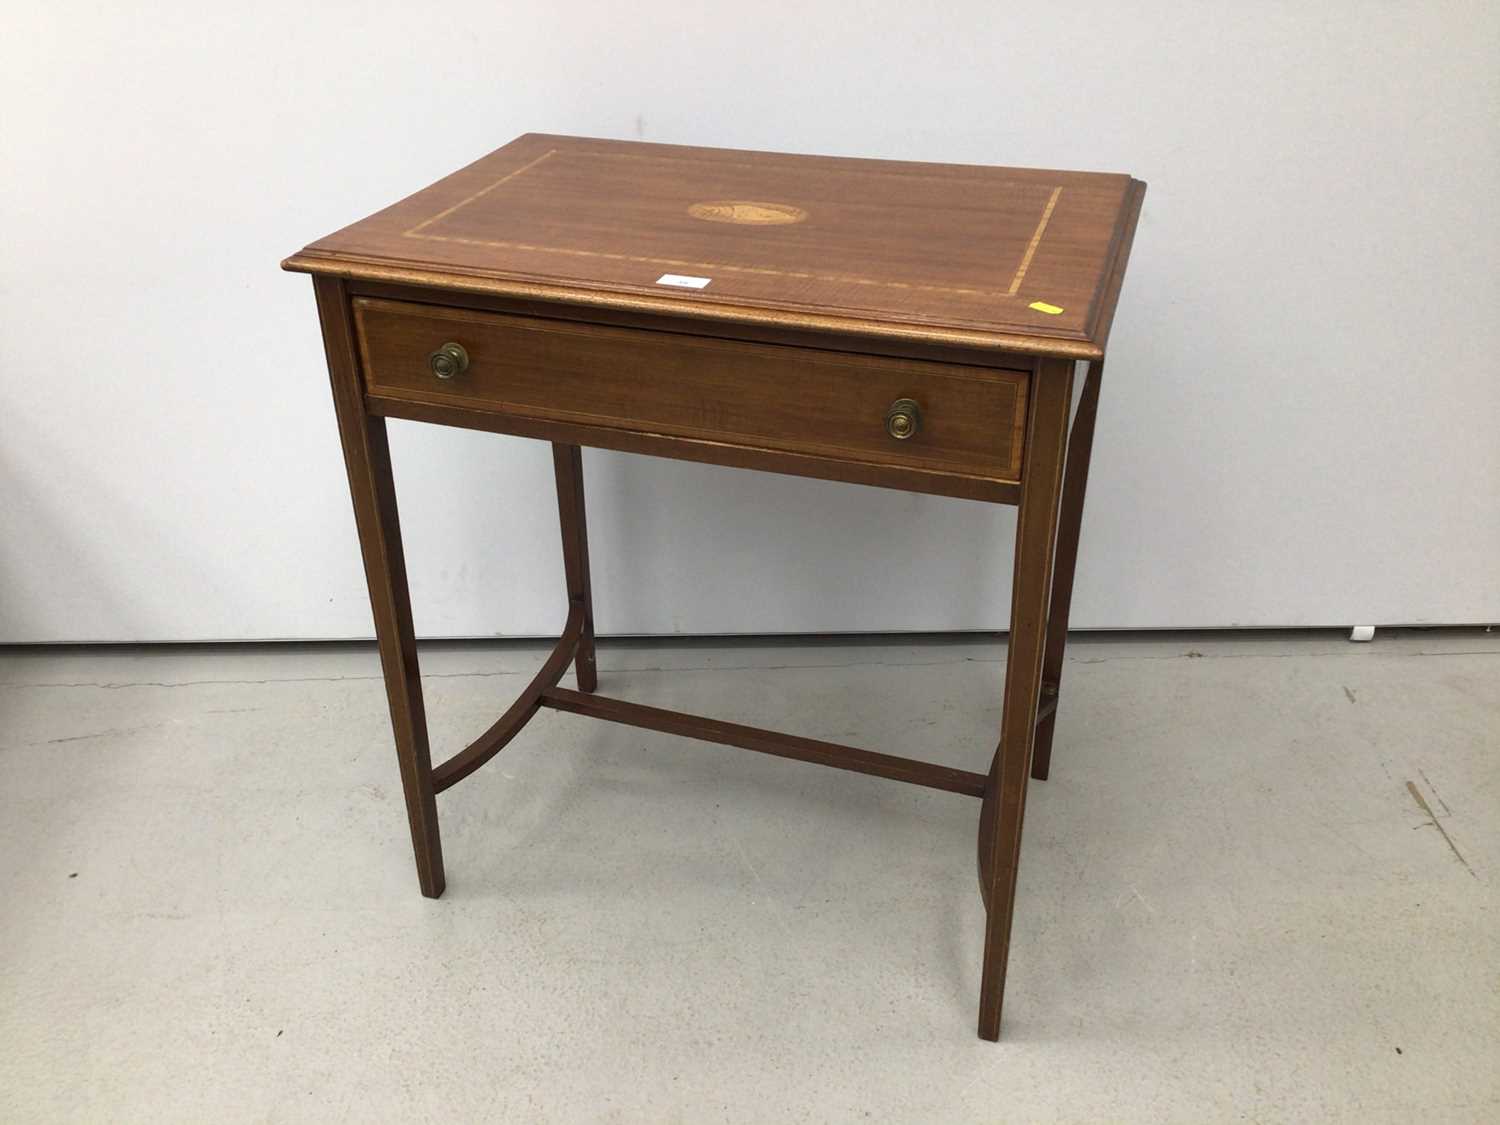 Lot 38 - Edwardian style inlaid mahogany side table with single drawer